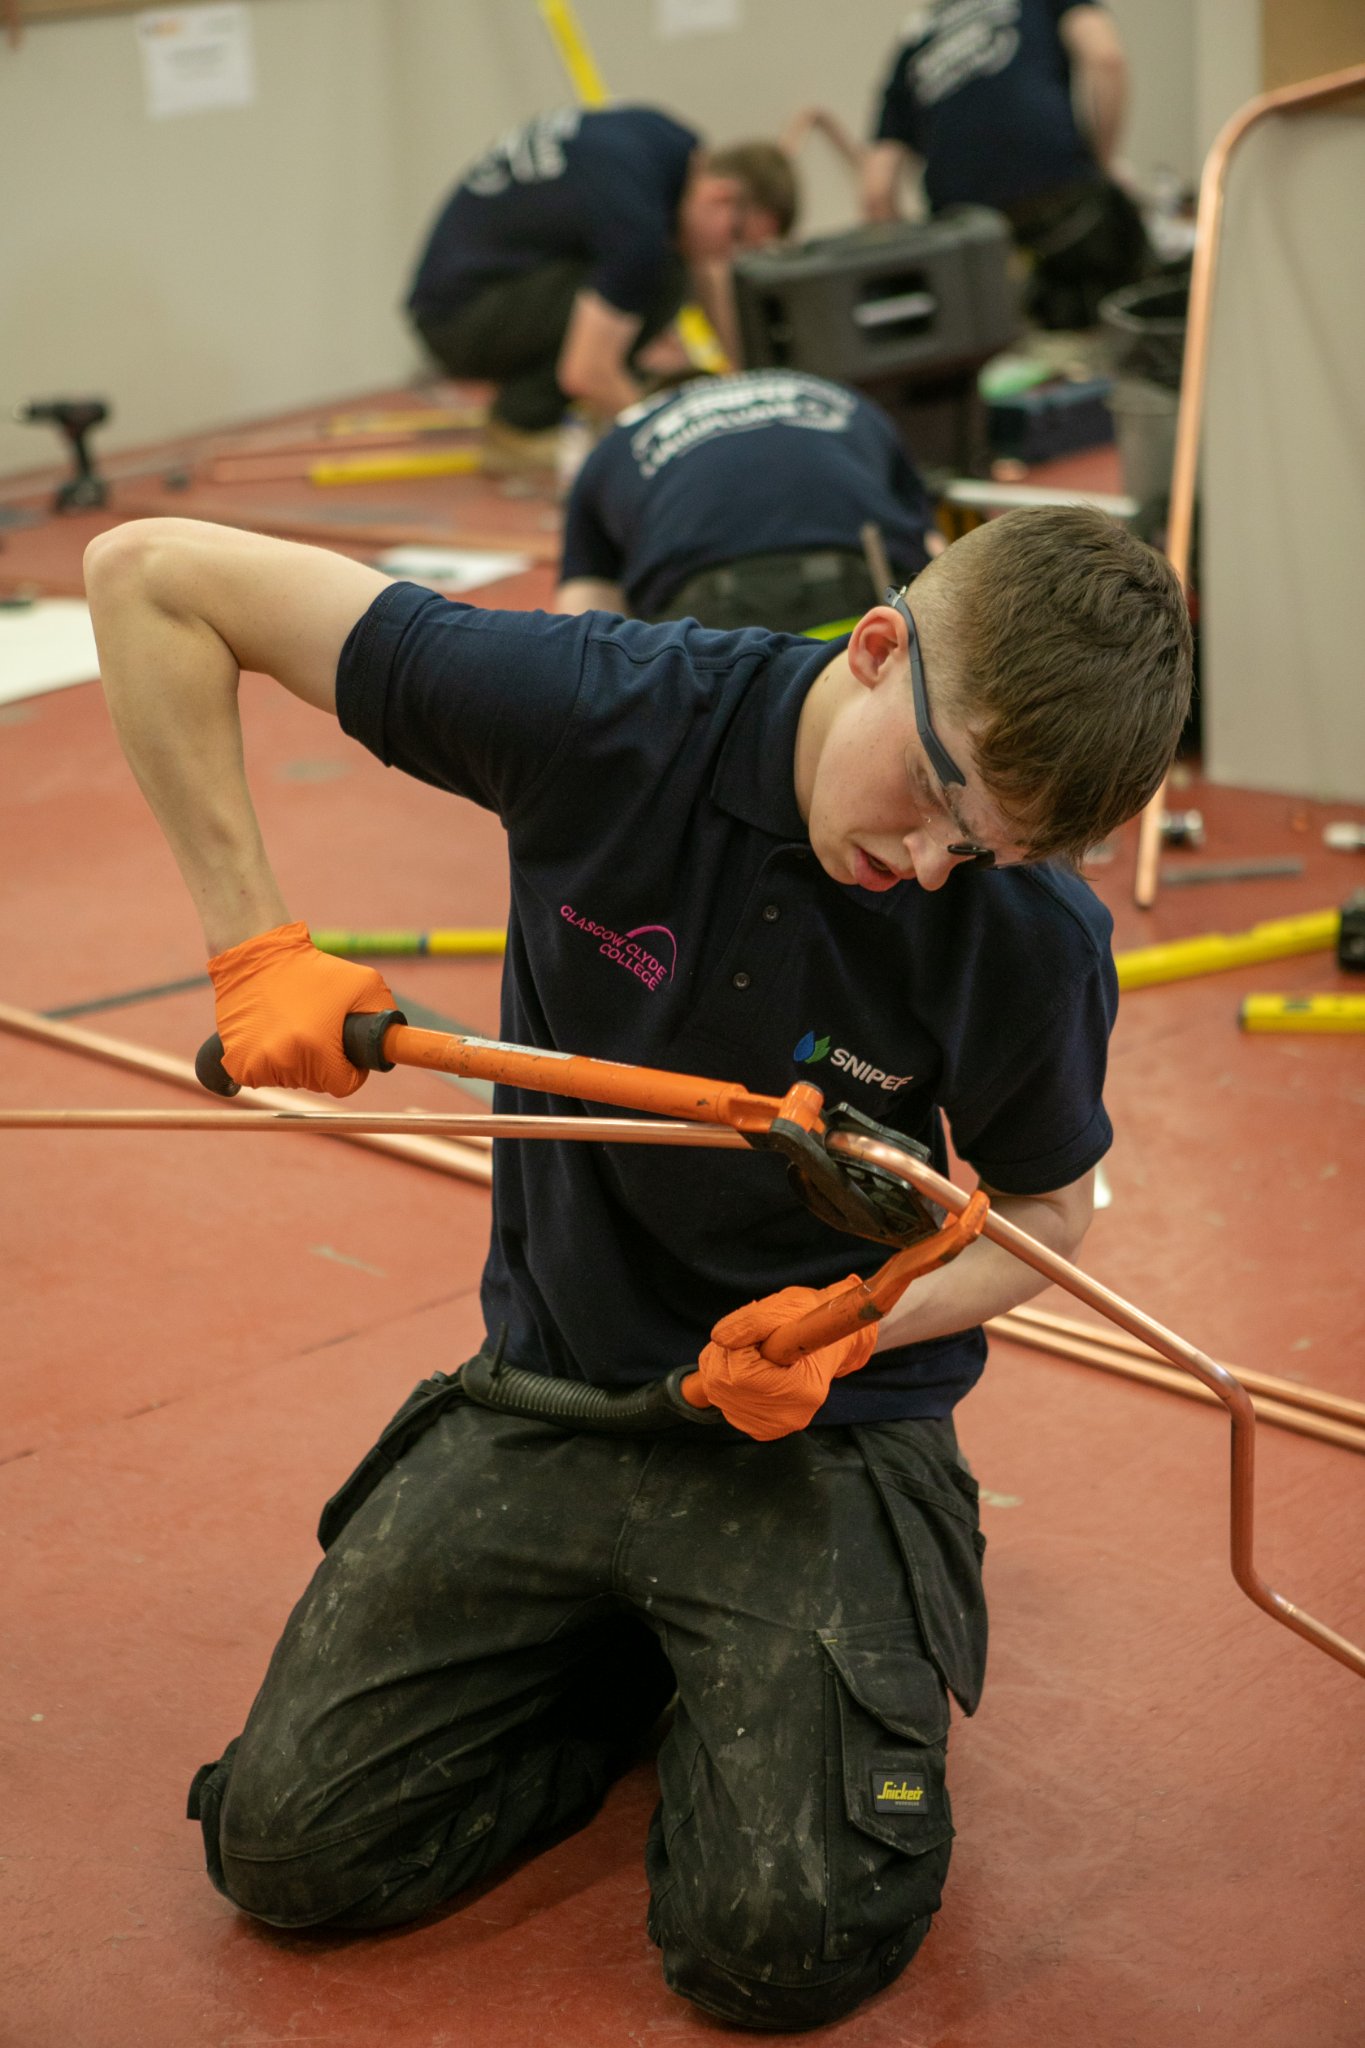 Scotland's brightest apprentice plumbers compete for the coveted title